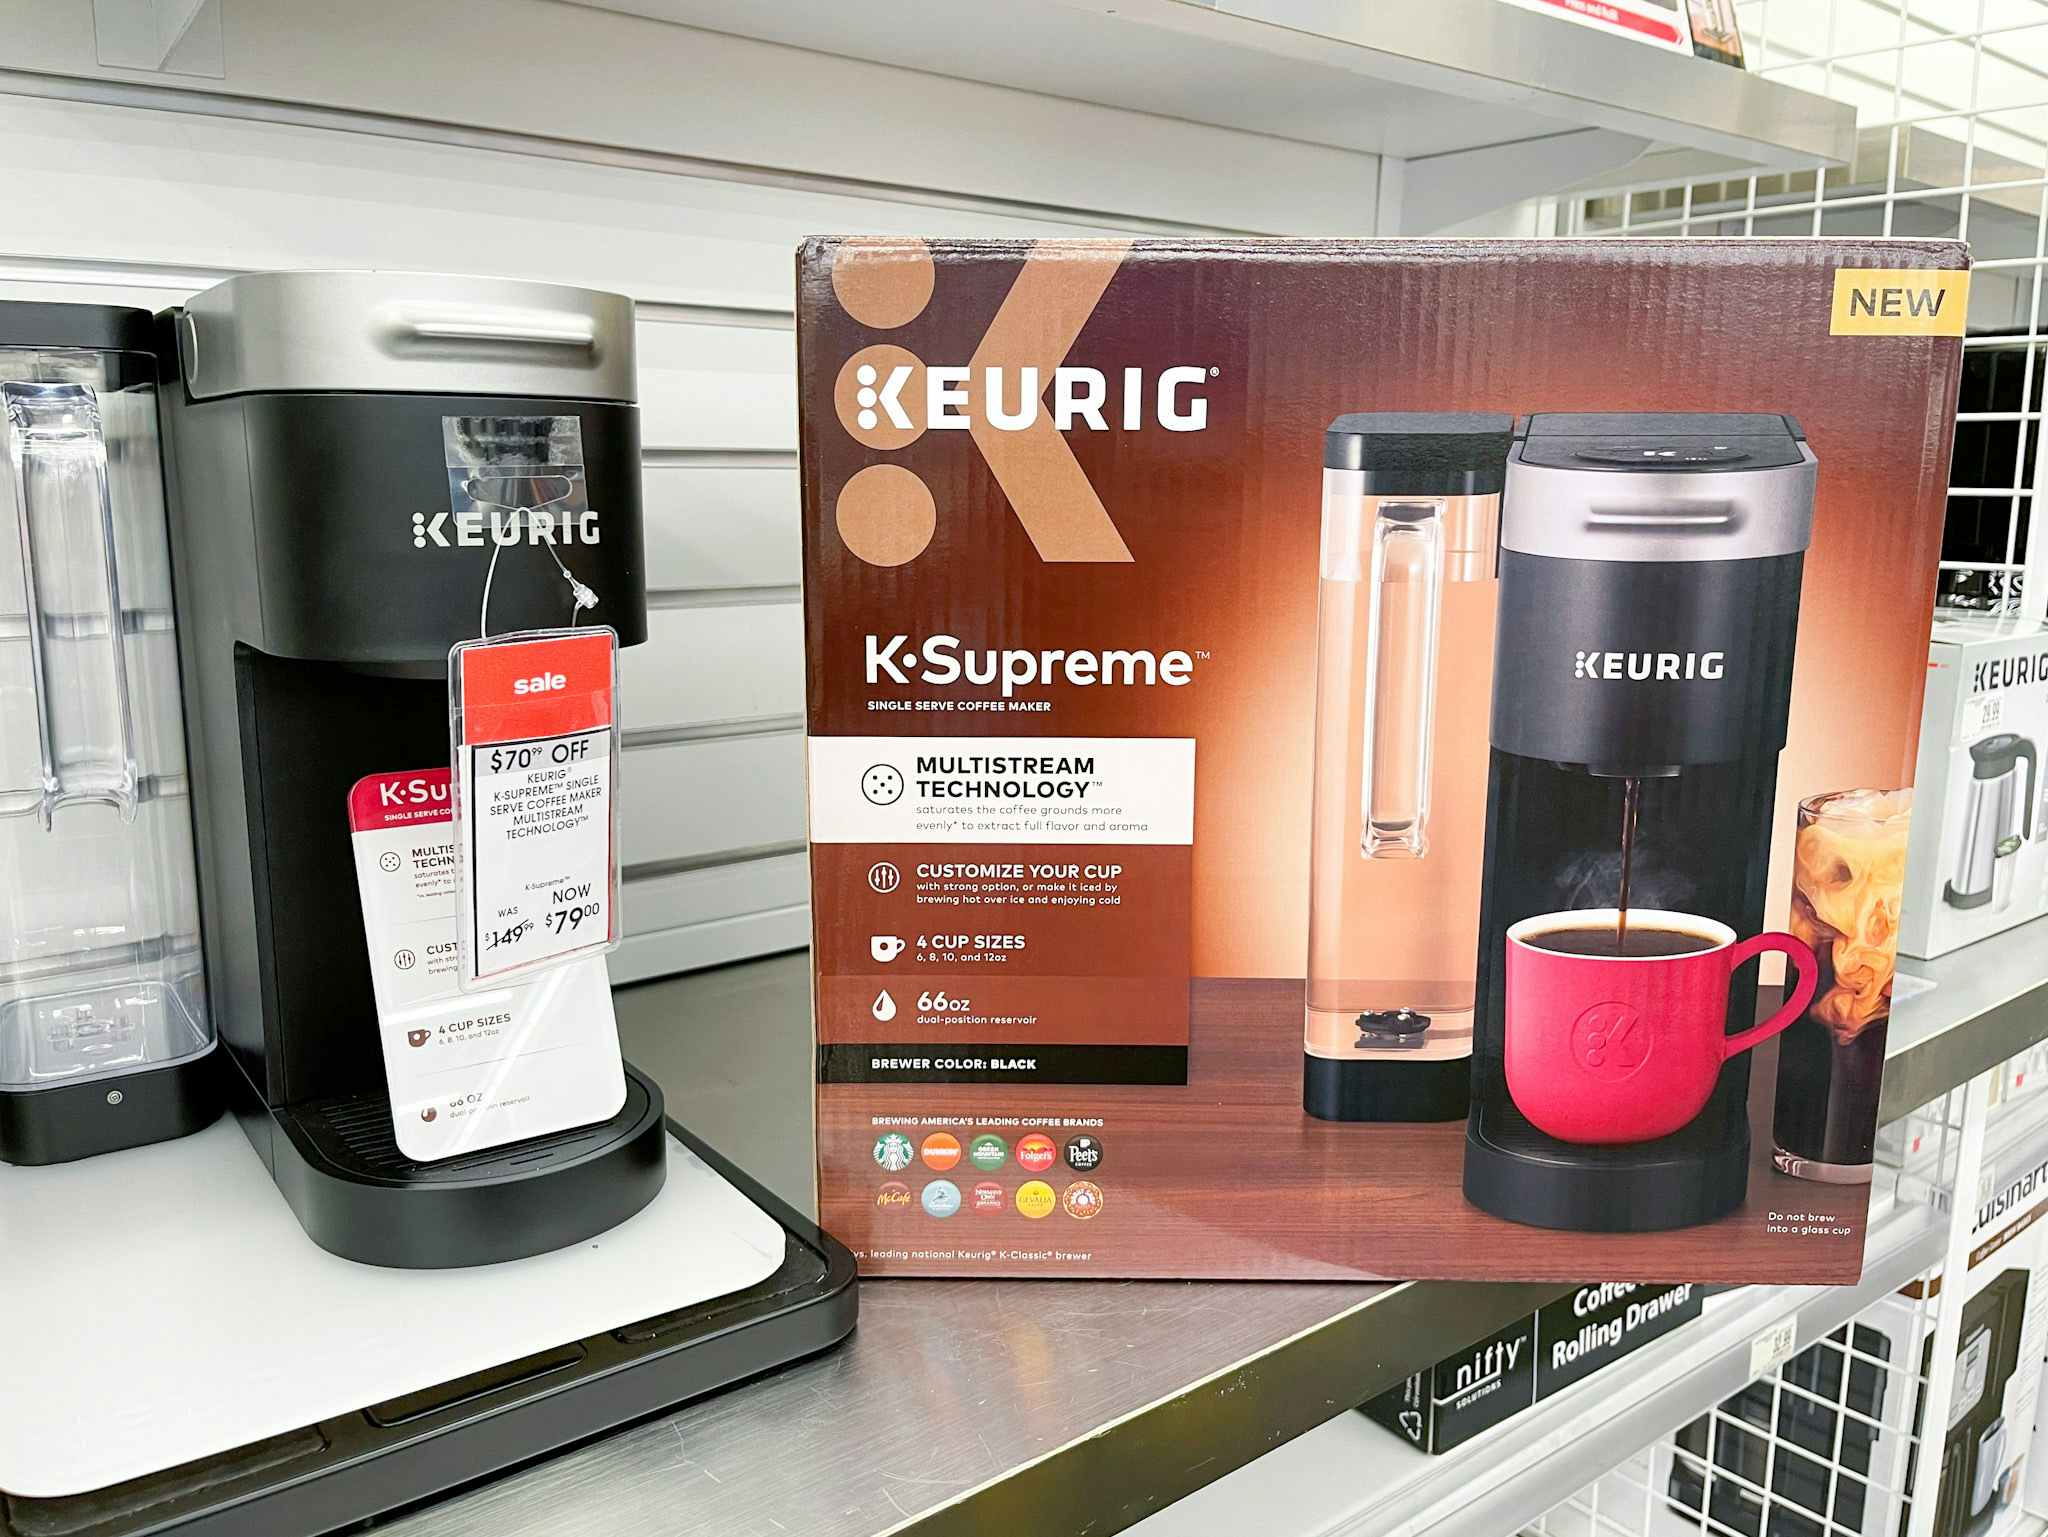 https://prod-cdn-thekrazycouponlady.imgix.net/wp-content/uploads/2021/11/bed-bath-and-beyond-keurig-k-supreme-2021-1-1637351833-1637351833.jpg?auto=format&fit=fill&q=25